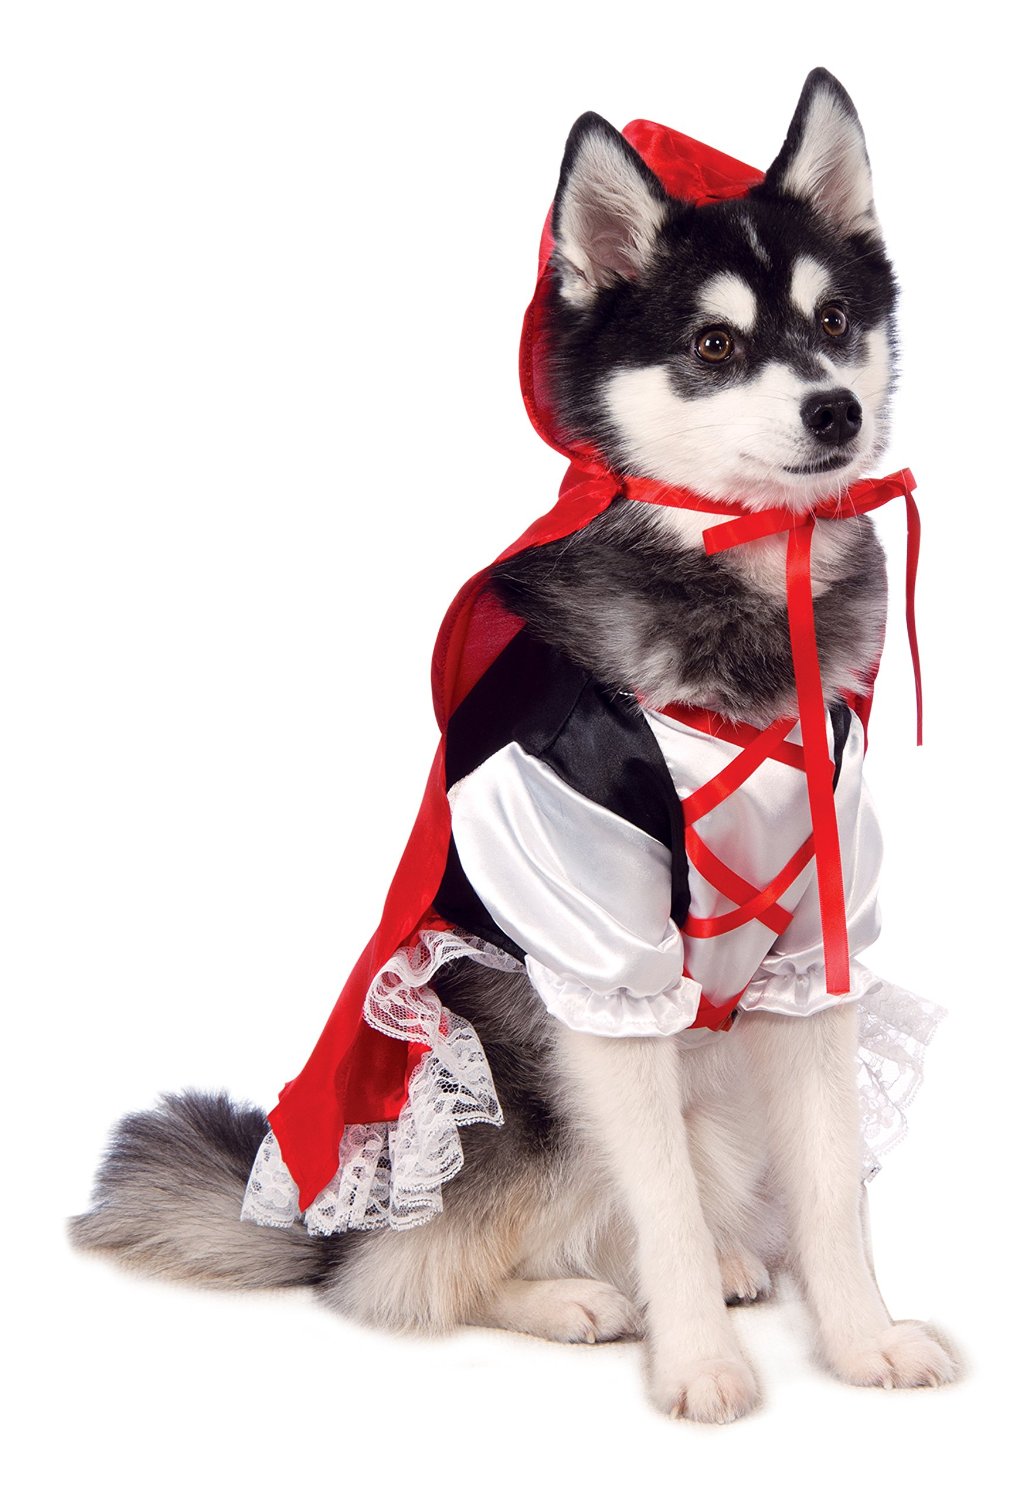 Little Red Riding Hood Costume